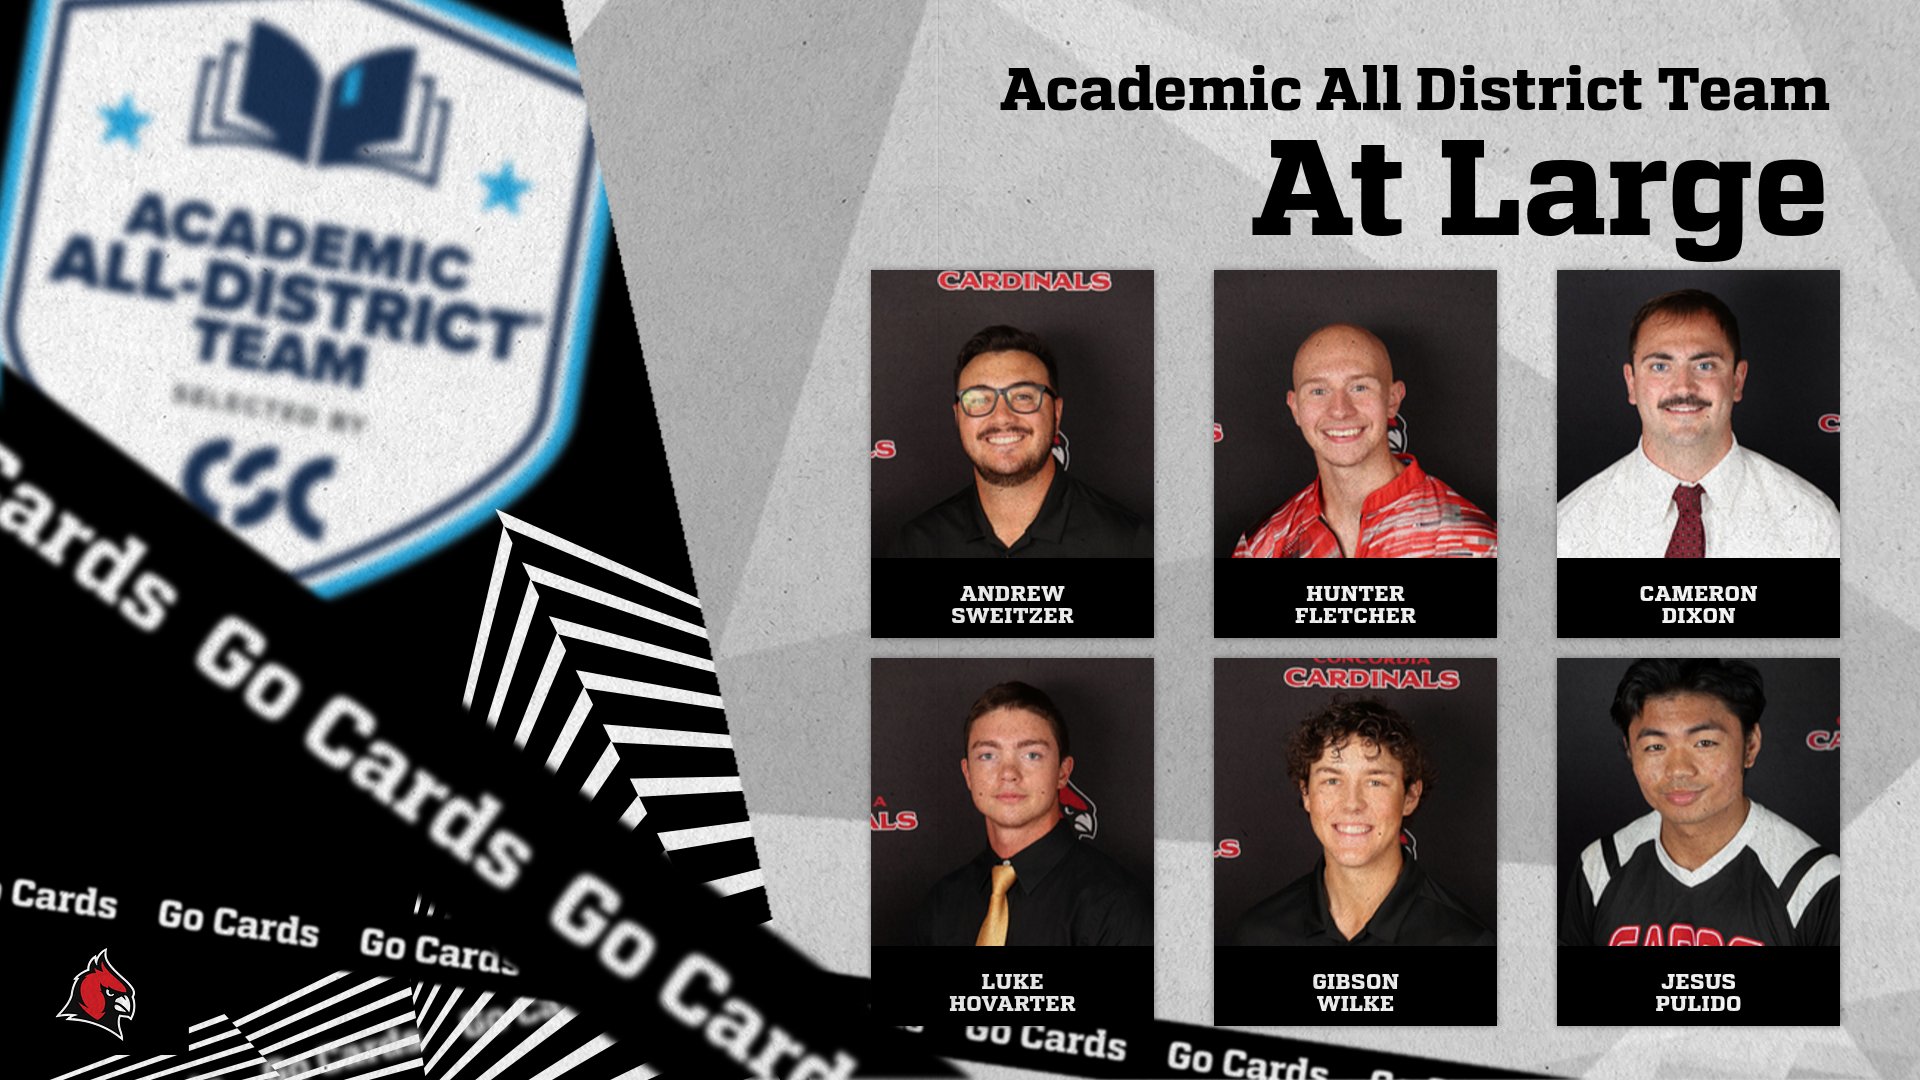 CSC ACADEMIC ALL-DISTRICT: Six Men's Cardinal Student-Athletes named to the CSC At-Large All-District Team